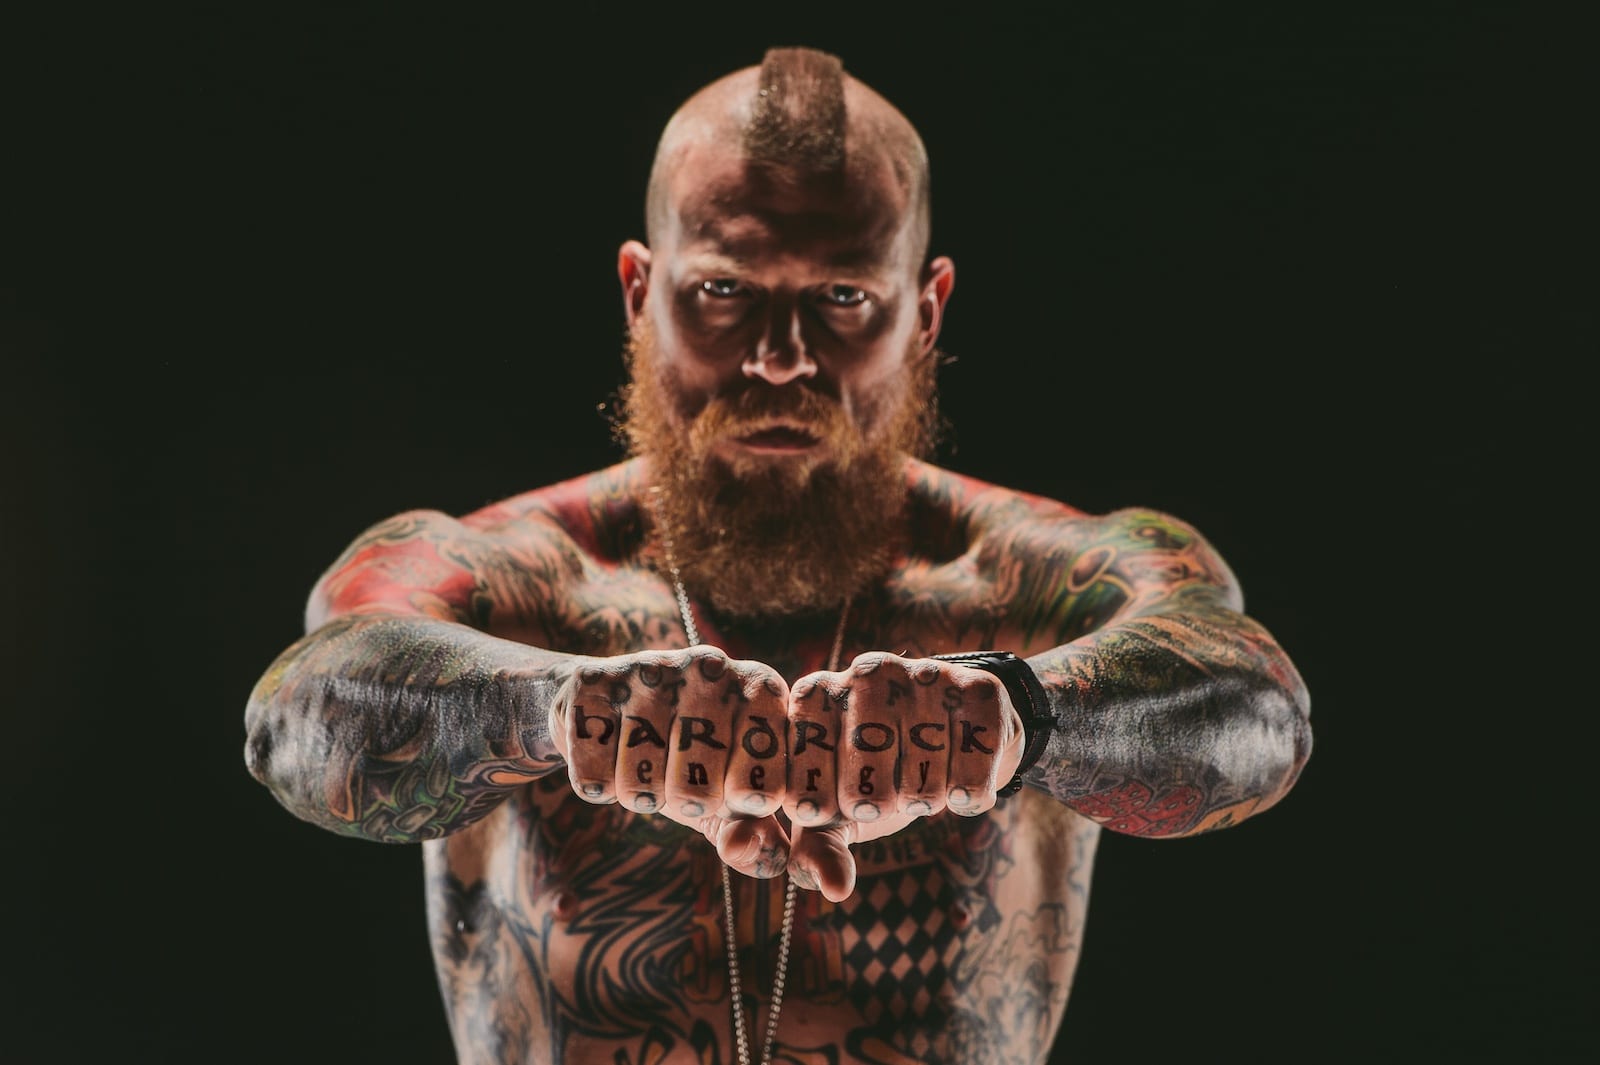 Tattooed man with mohawk posing with letters on his knuckles spelling out Hard Rock